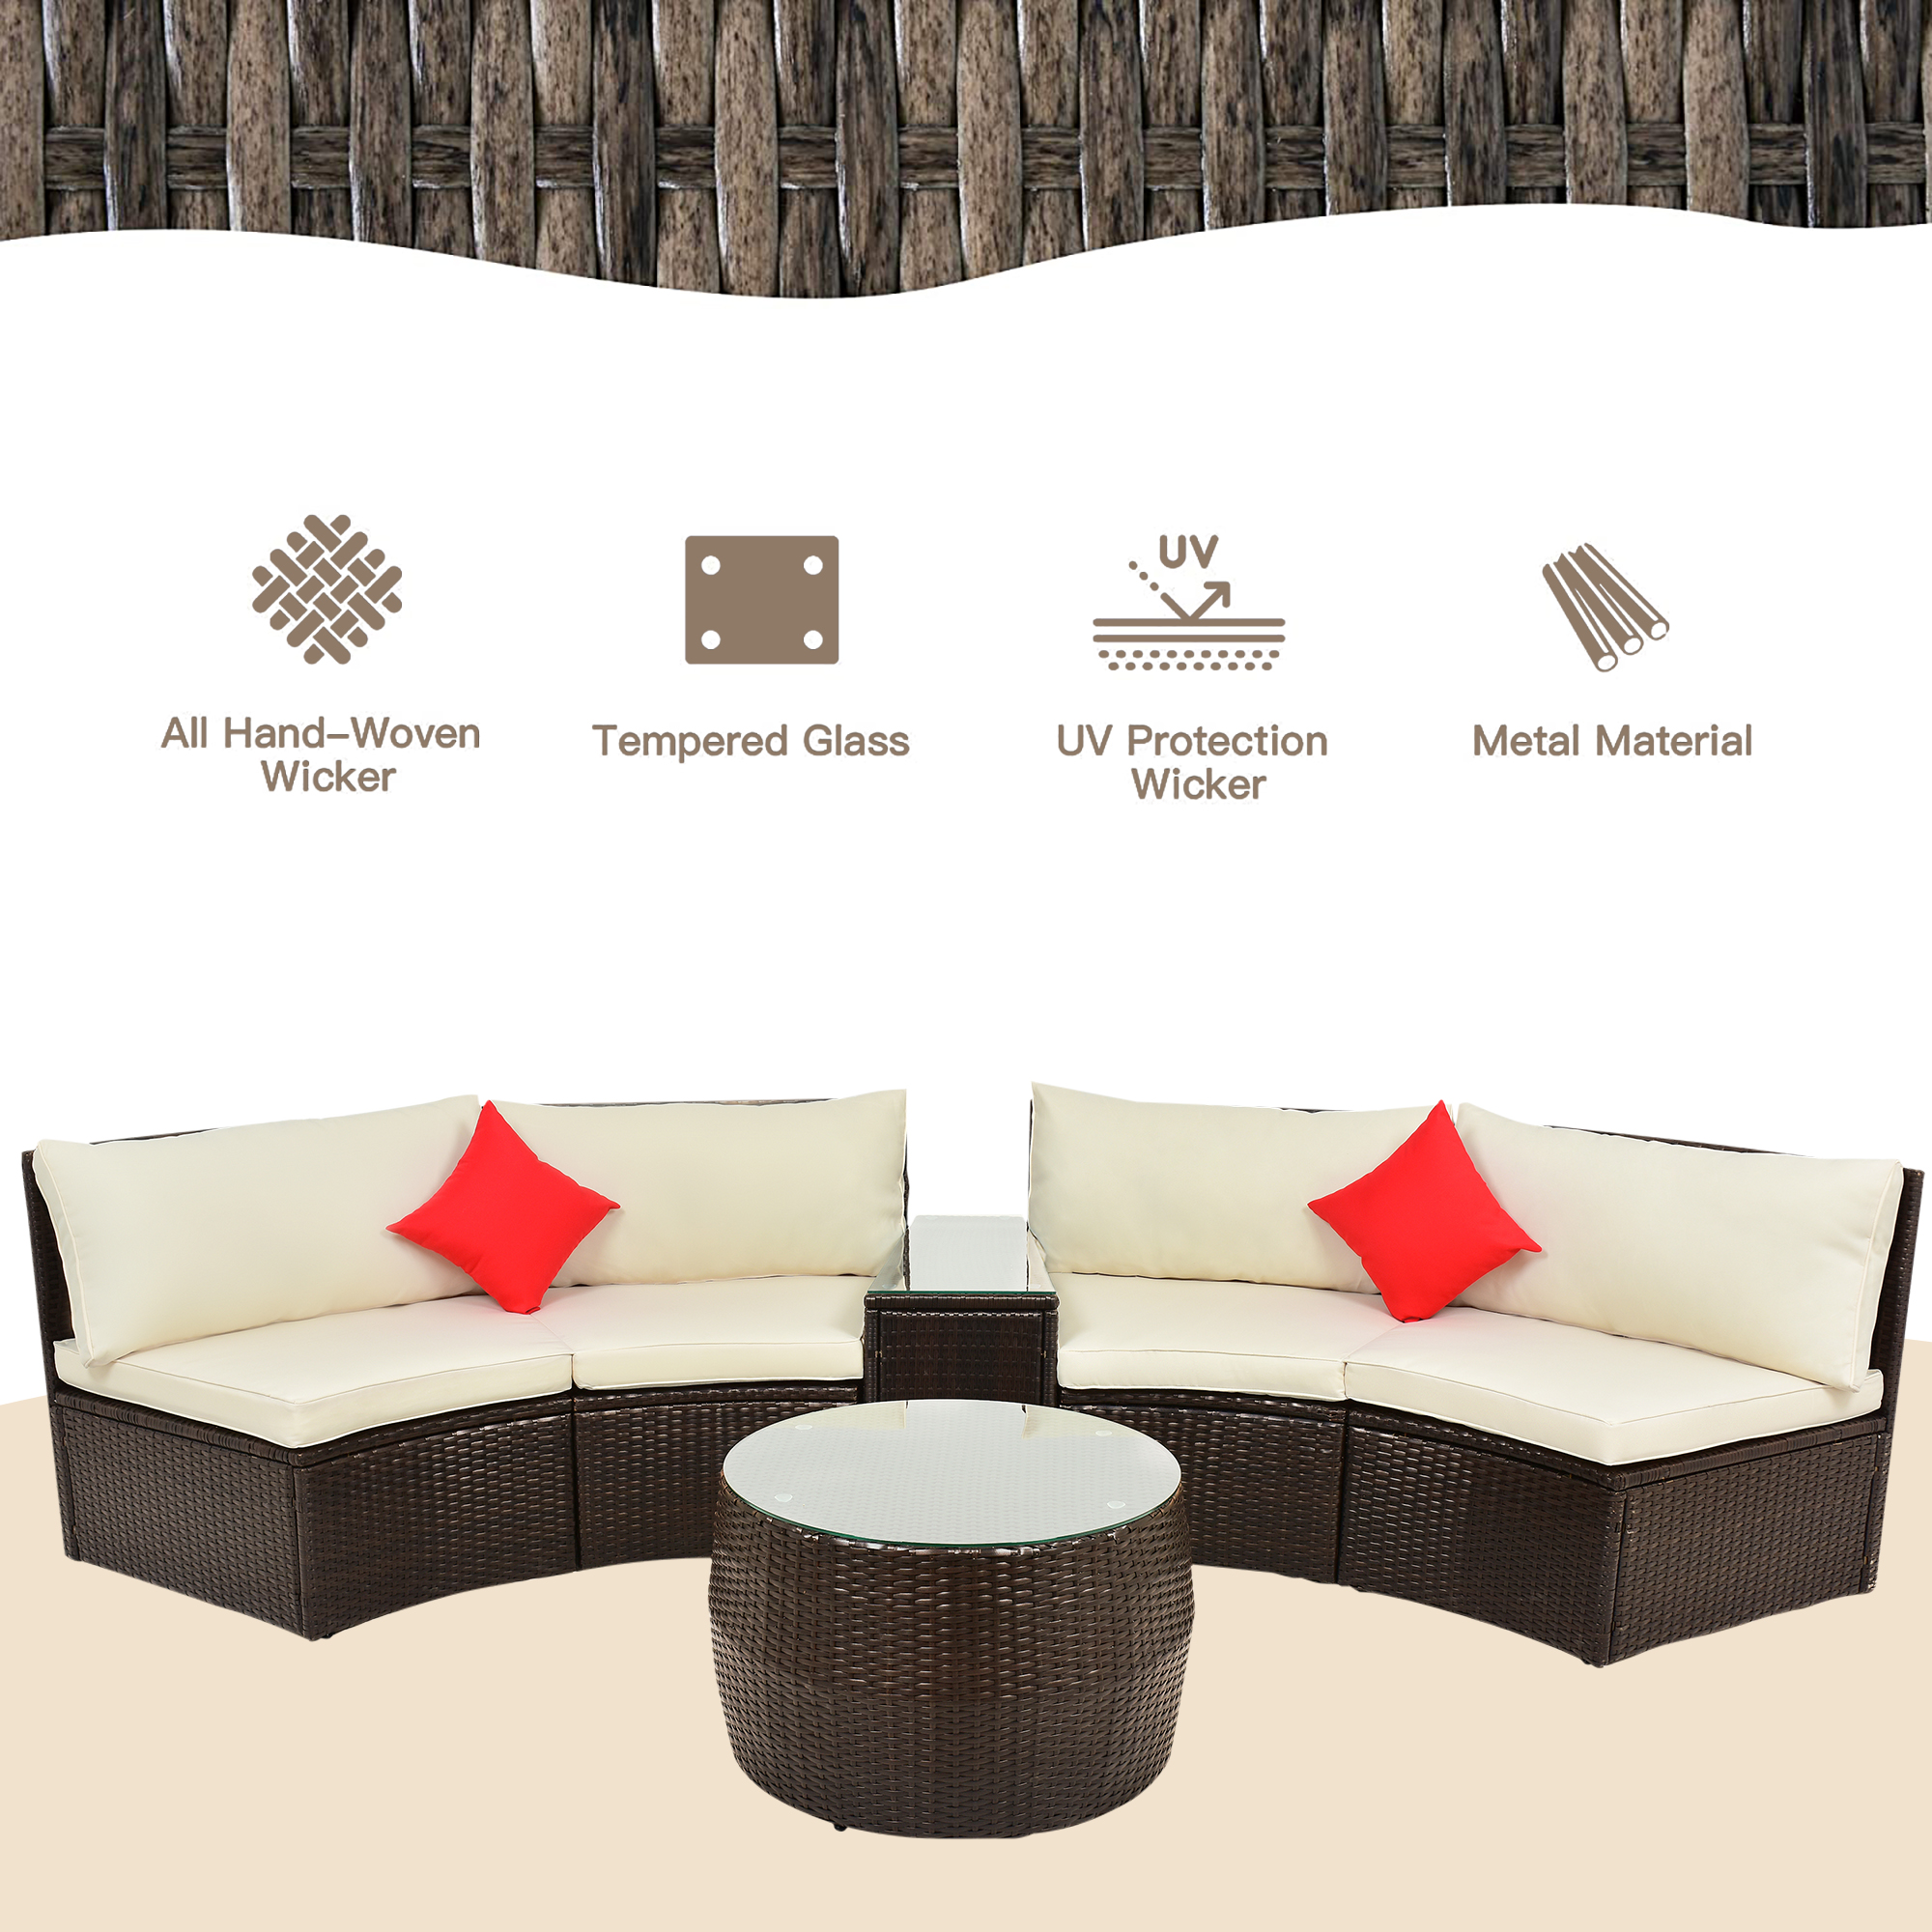 Outdoor Patio Sectional Furniture Wicker Sofa Set, 4-Piece Wicker Patio Conversation Furniture Set with 2 Double Half-Moon Sofa, 1 Coffee Table, 1 Side Table, 2 Pillow, Beige Padded Cushions, S5555 - image 4 of 9